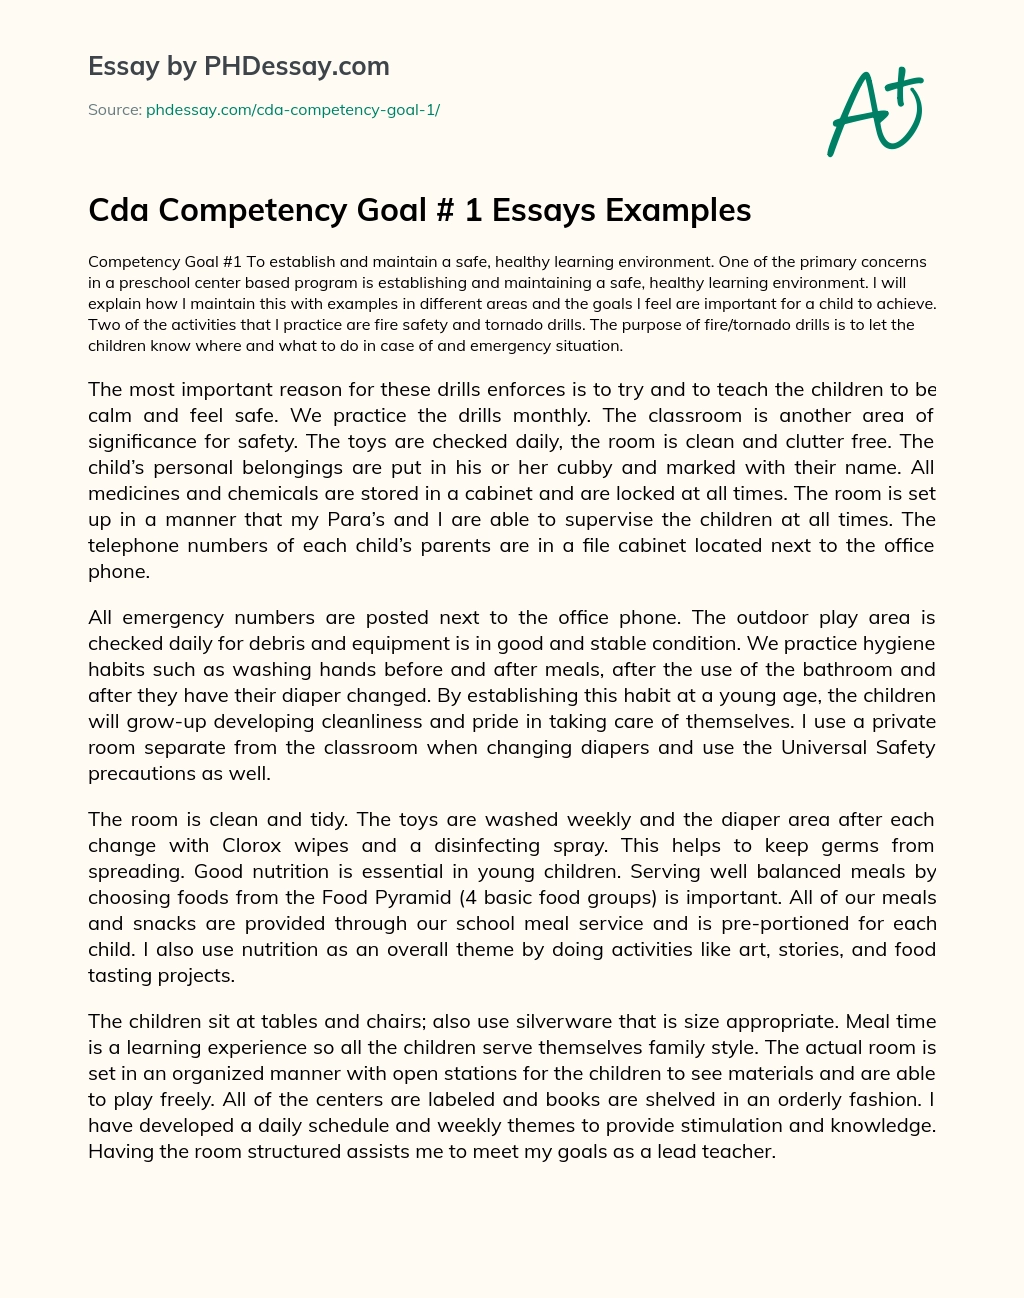 cda competency goal 3 examples